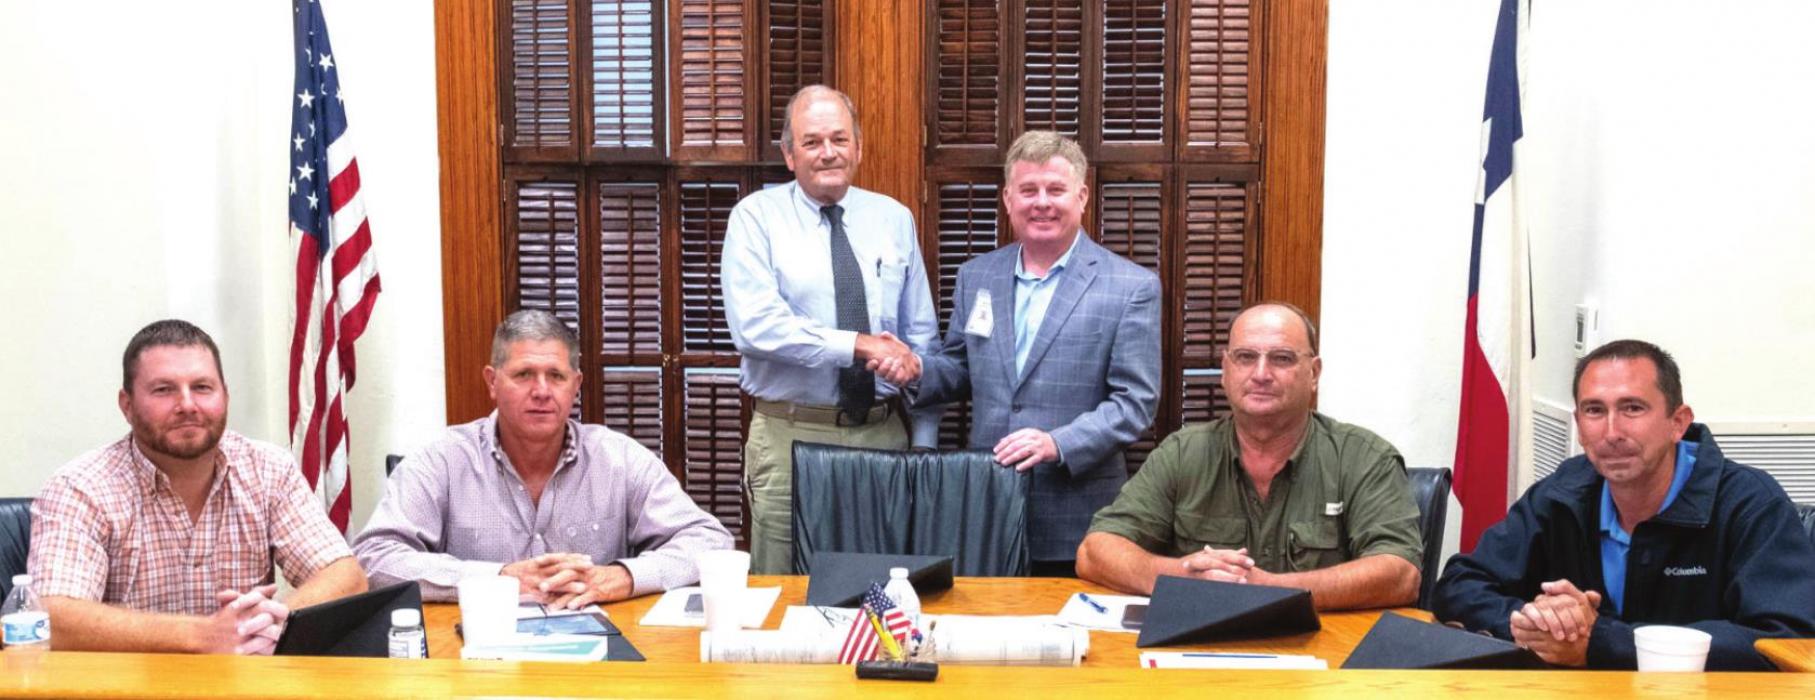 Fayette County Commissioners contributed $500,000 of federal grant funds from the American Rescue Plan to St. Mark’s Medical Center’s capital improvement campaign. Pictured are (standing) County Judge Joe Weber and St. Mark’s CEO Mark Kimball, (seated) Pct. 4 Commissioner Drew Brossmann, Pct. 3 Commissioner Harvey Berckenhoff, Pct. 2 Commissioner Luke Sternadel and Pct. 1 Commissioner Jason McBroom. Photo by Andy Behlen